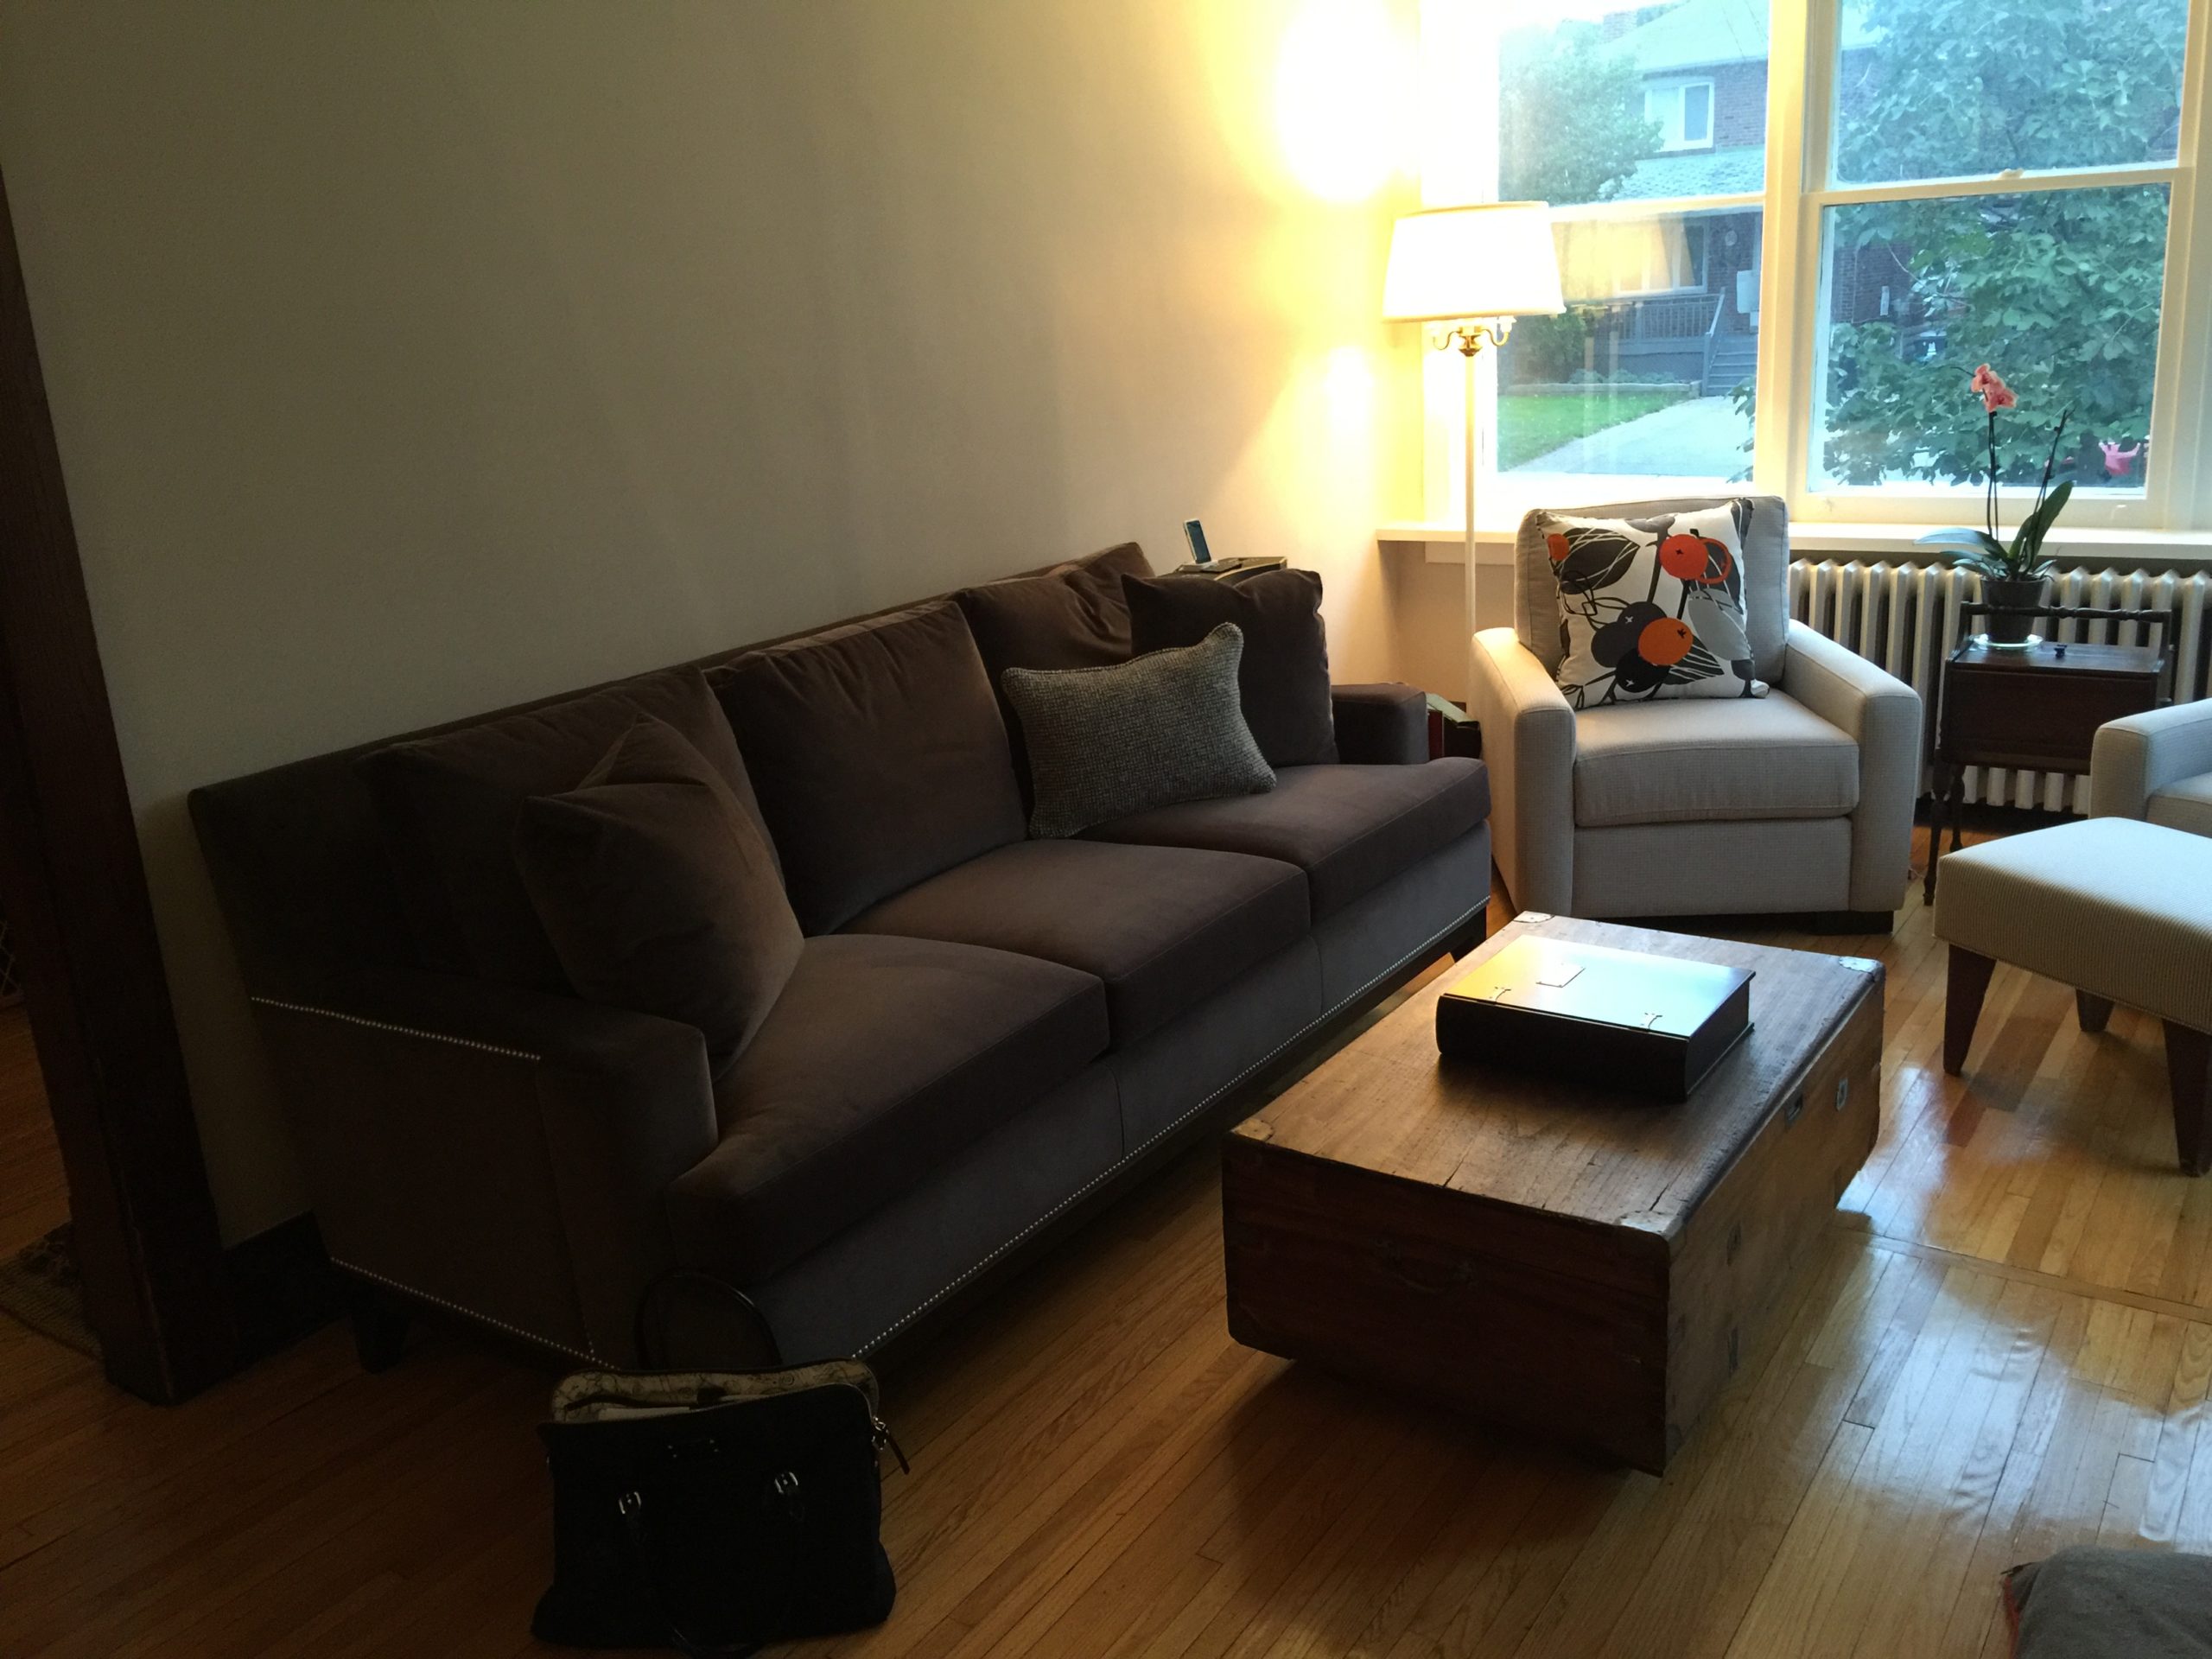 before photo of living room with dark grey sofa, an old lamp in the corner, and small brown coffee table